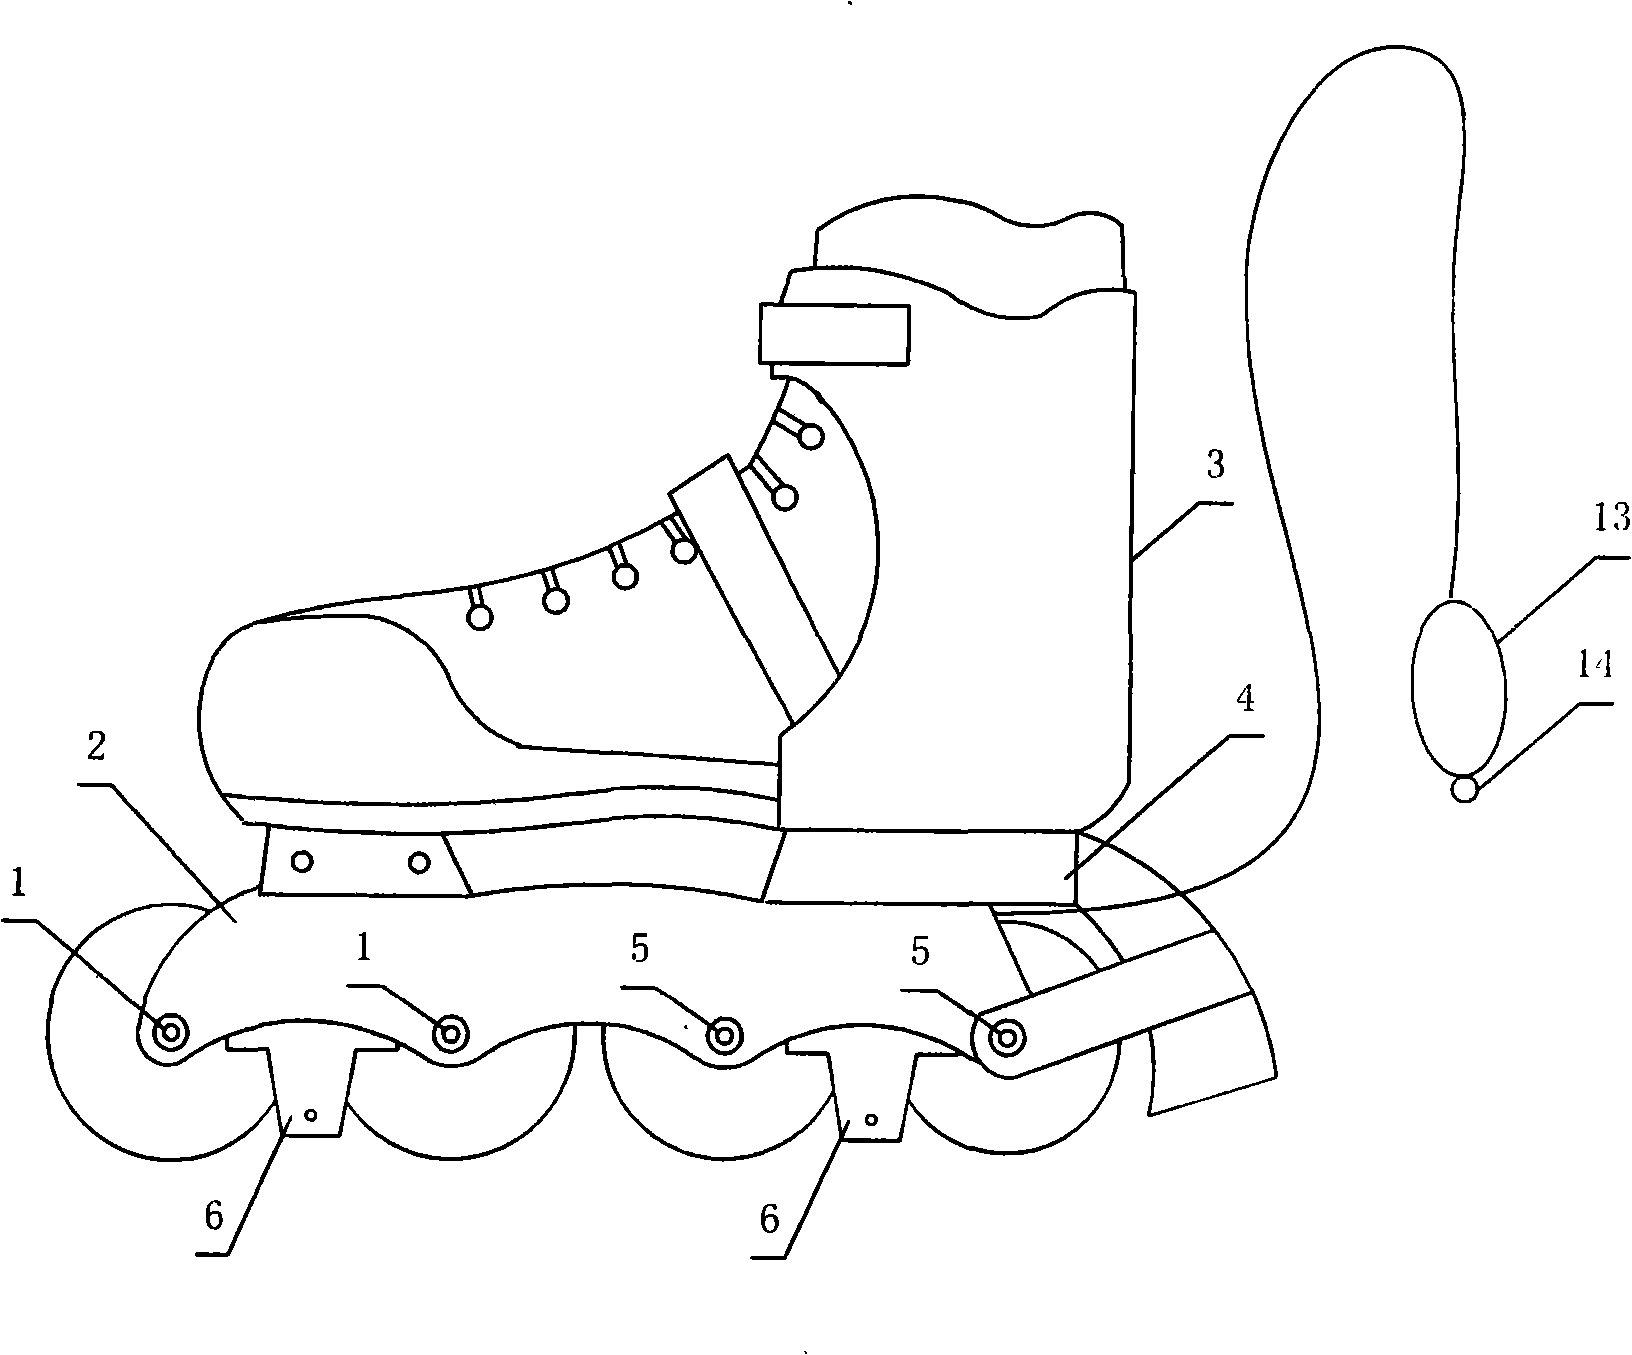 Dry skate equipped with hand-held brake device